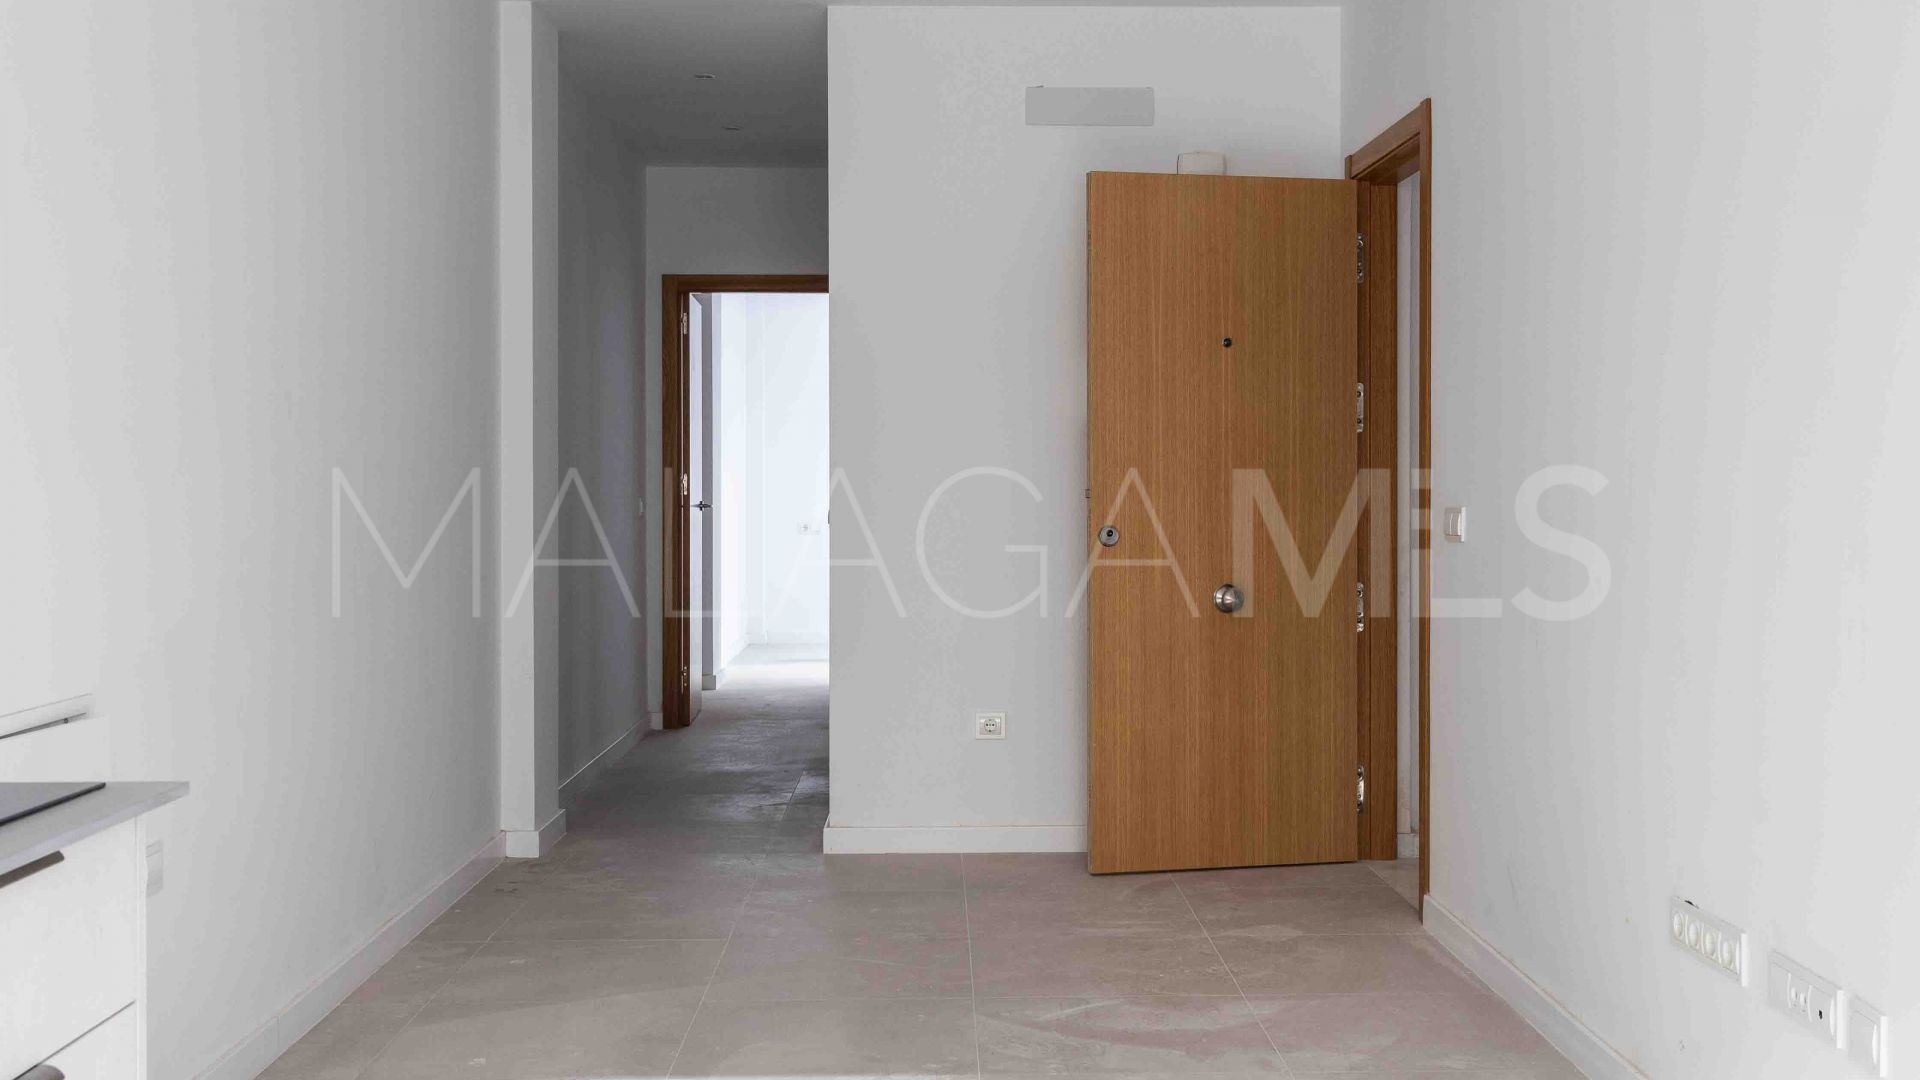 For sale ground floor apartment in Las Lagunas with 1 bedroom